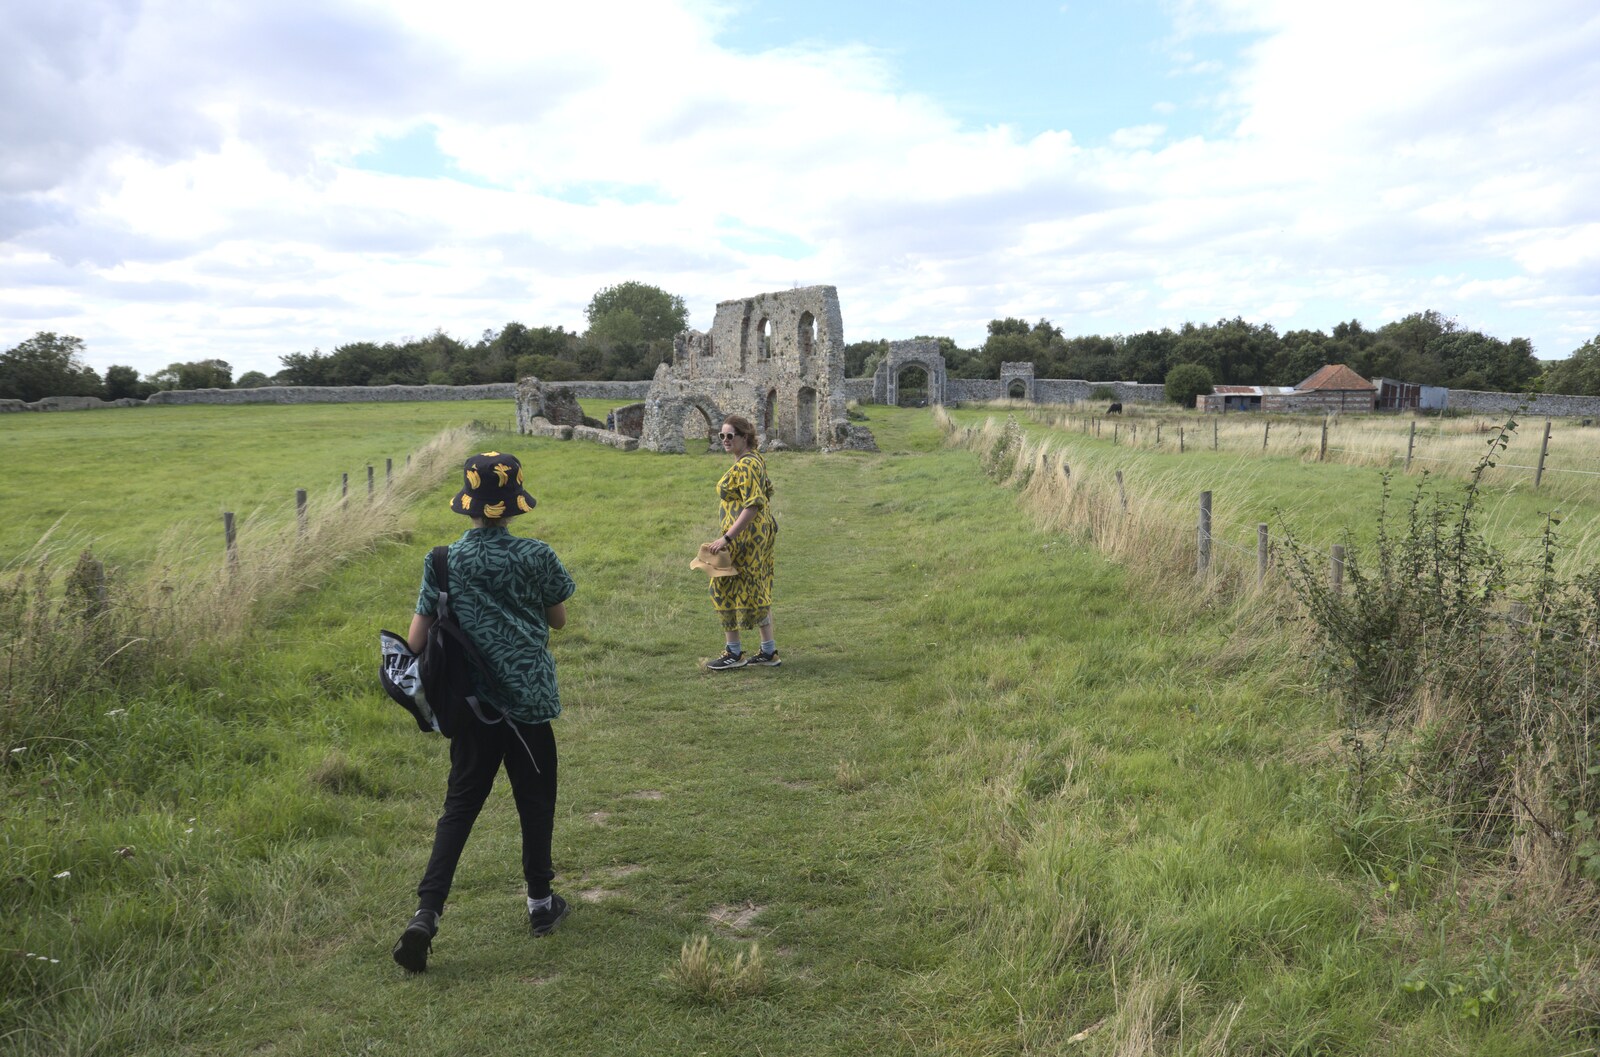 Harry and Isobel near the ruins of Greyfriars from A Cambridge Reunion on the Beach, Dunwich, Suffolk - 23rd August 2023